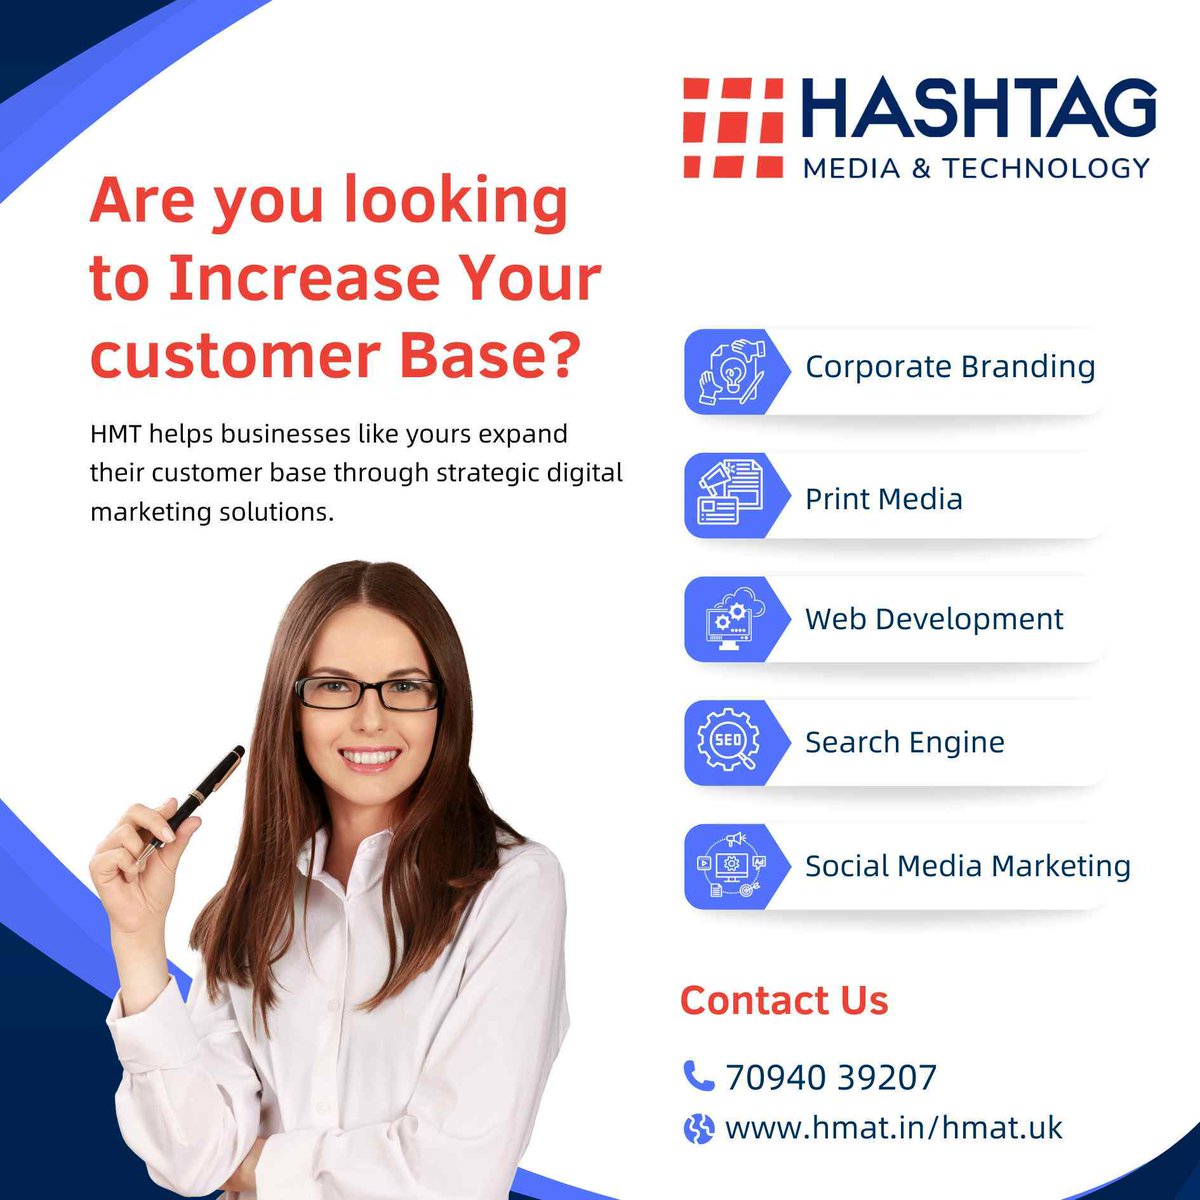 Call on- +91 7094039207 or email us at: Himal@hmat.in for free quote.
#HashtagMedia #Technology #DigitalMarketing #BusinessGrowth #DigitalSolutions #CustomerAcquisition #MarketingStrategy #BusinessBoost
#Success2024 #DigitalSuccess #DigitalMarketing #BusinessSuccess